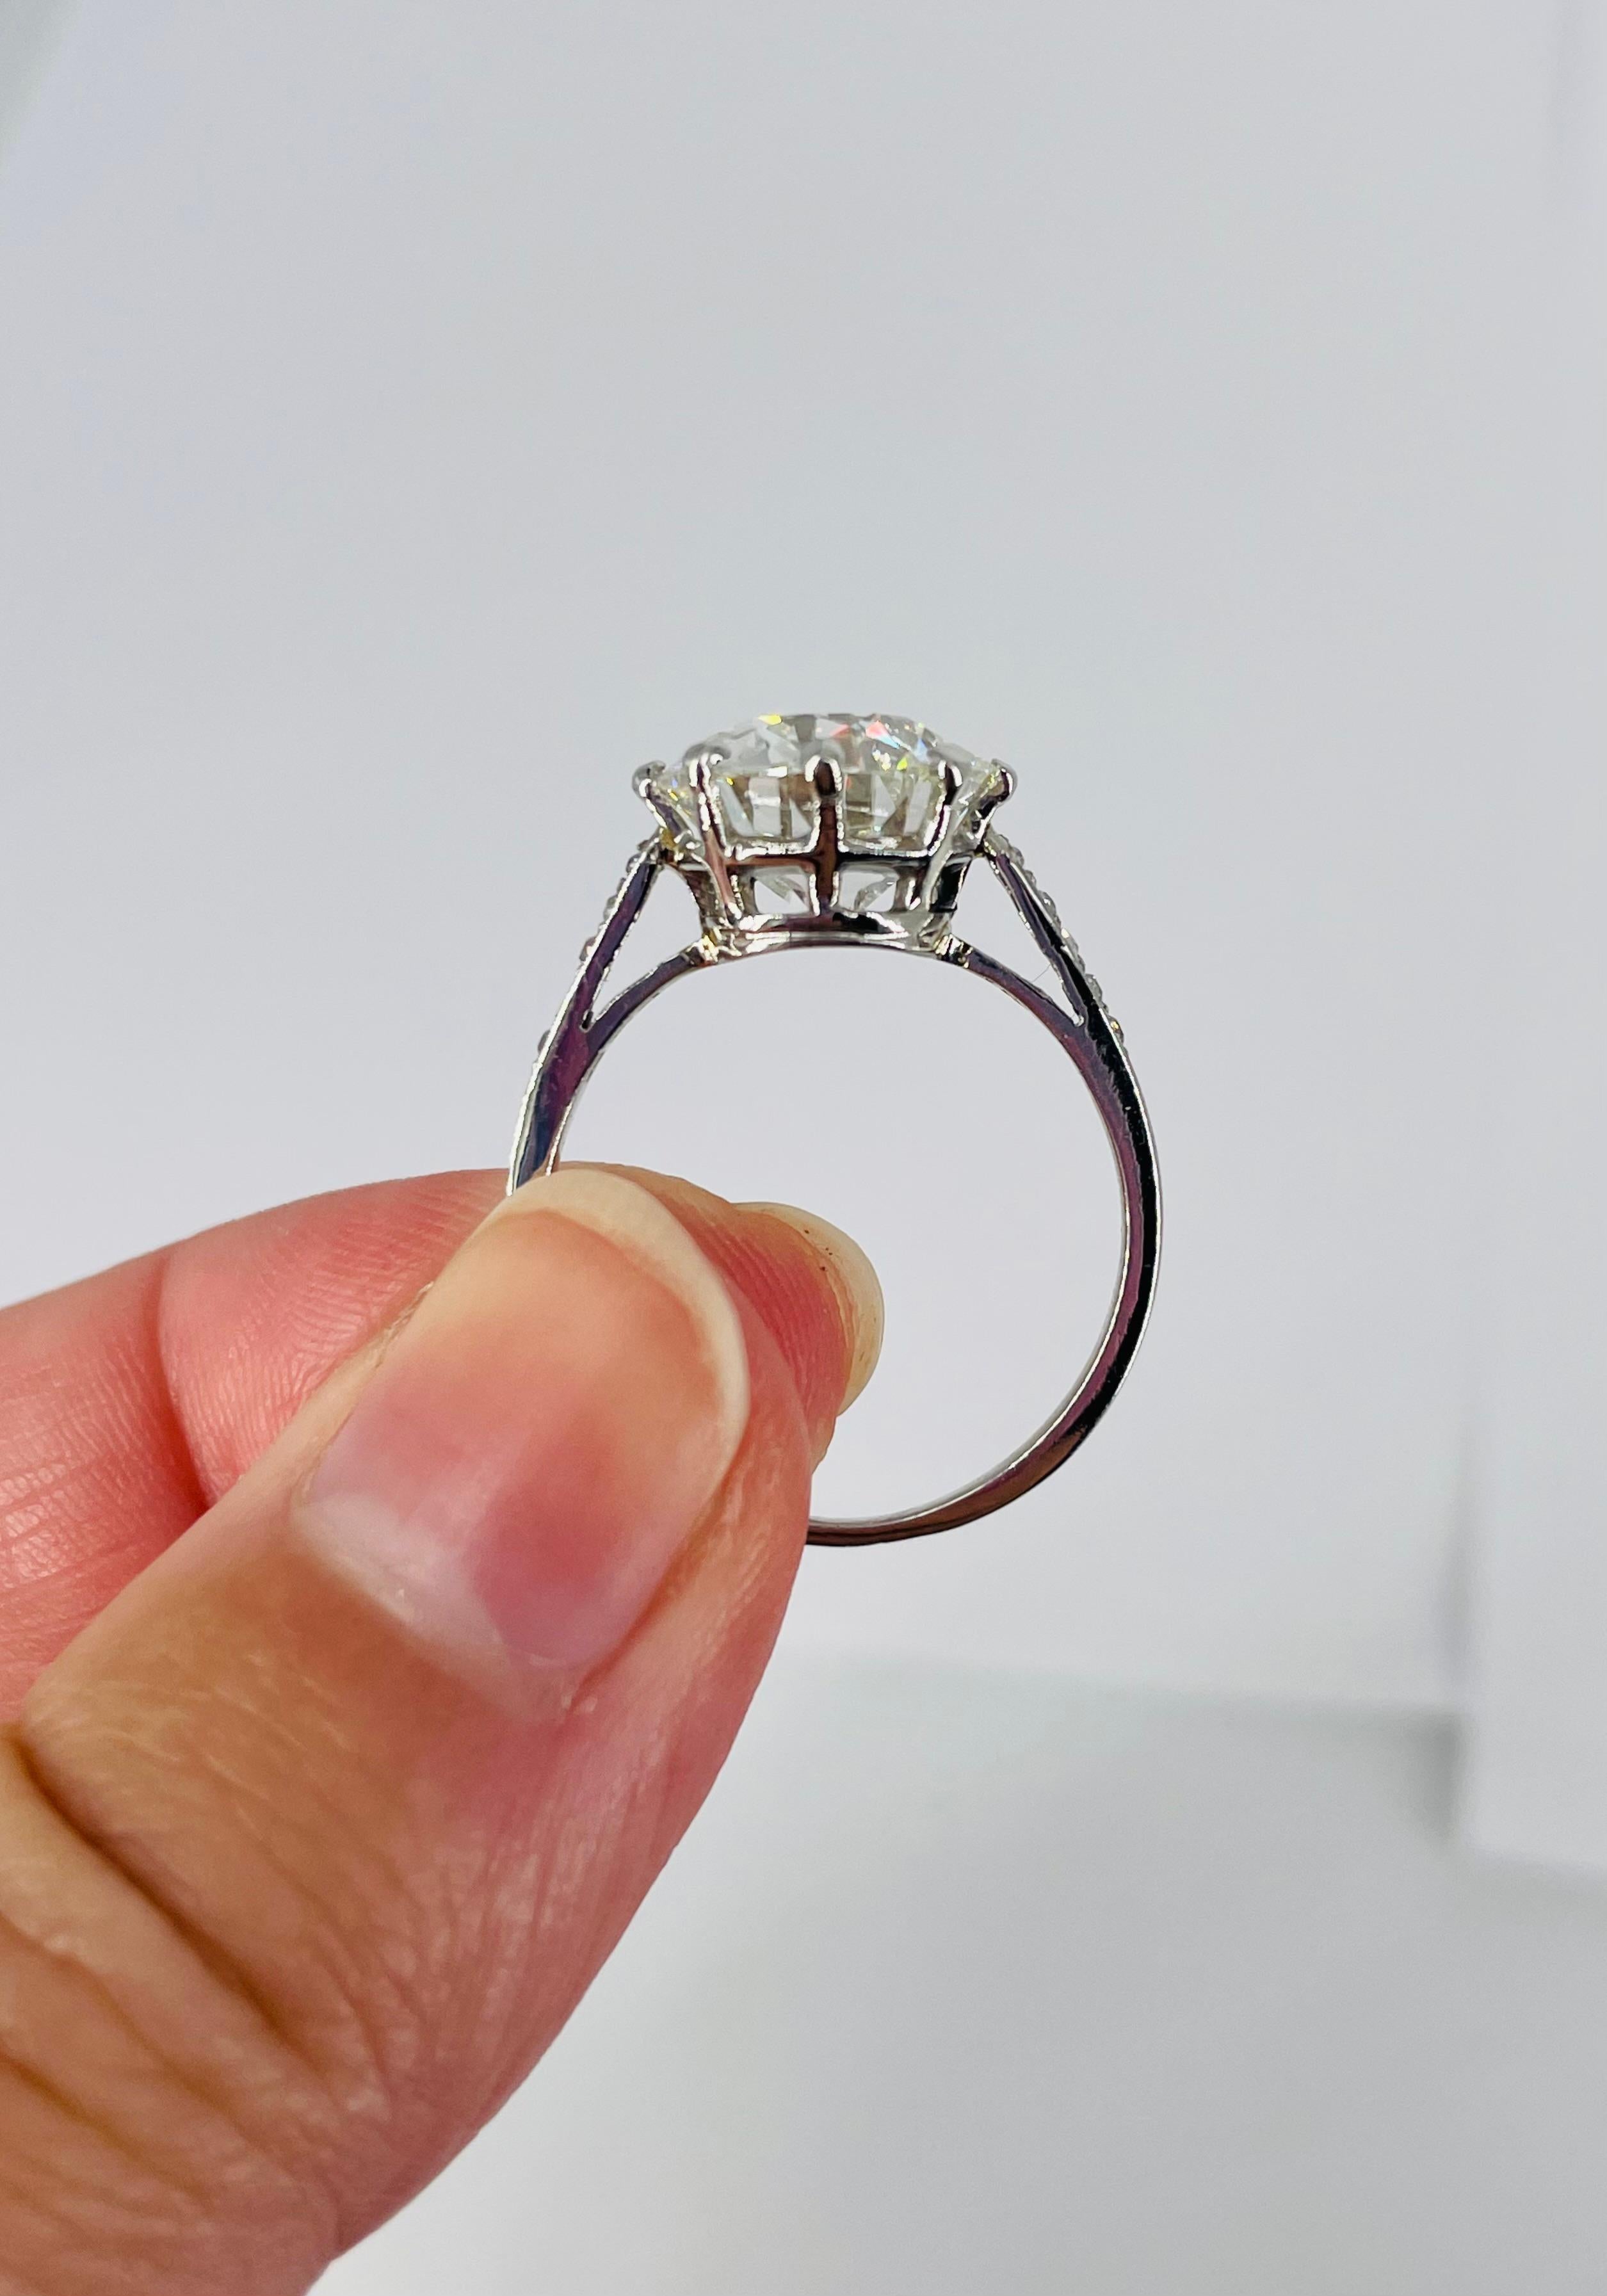 J. Birrnbach GIA Certified 4.55 Carat Old Mine Cut Diamond Vintage Ring In Good Condition For Sale In New York, NY